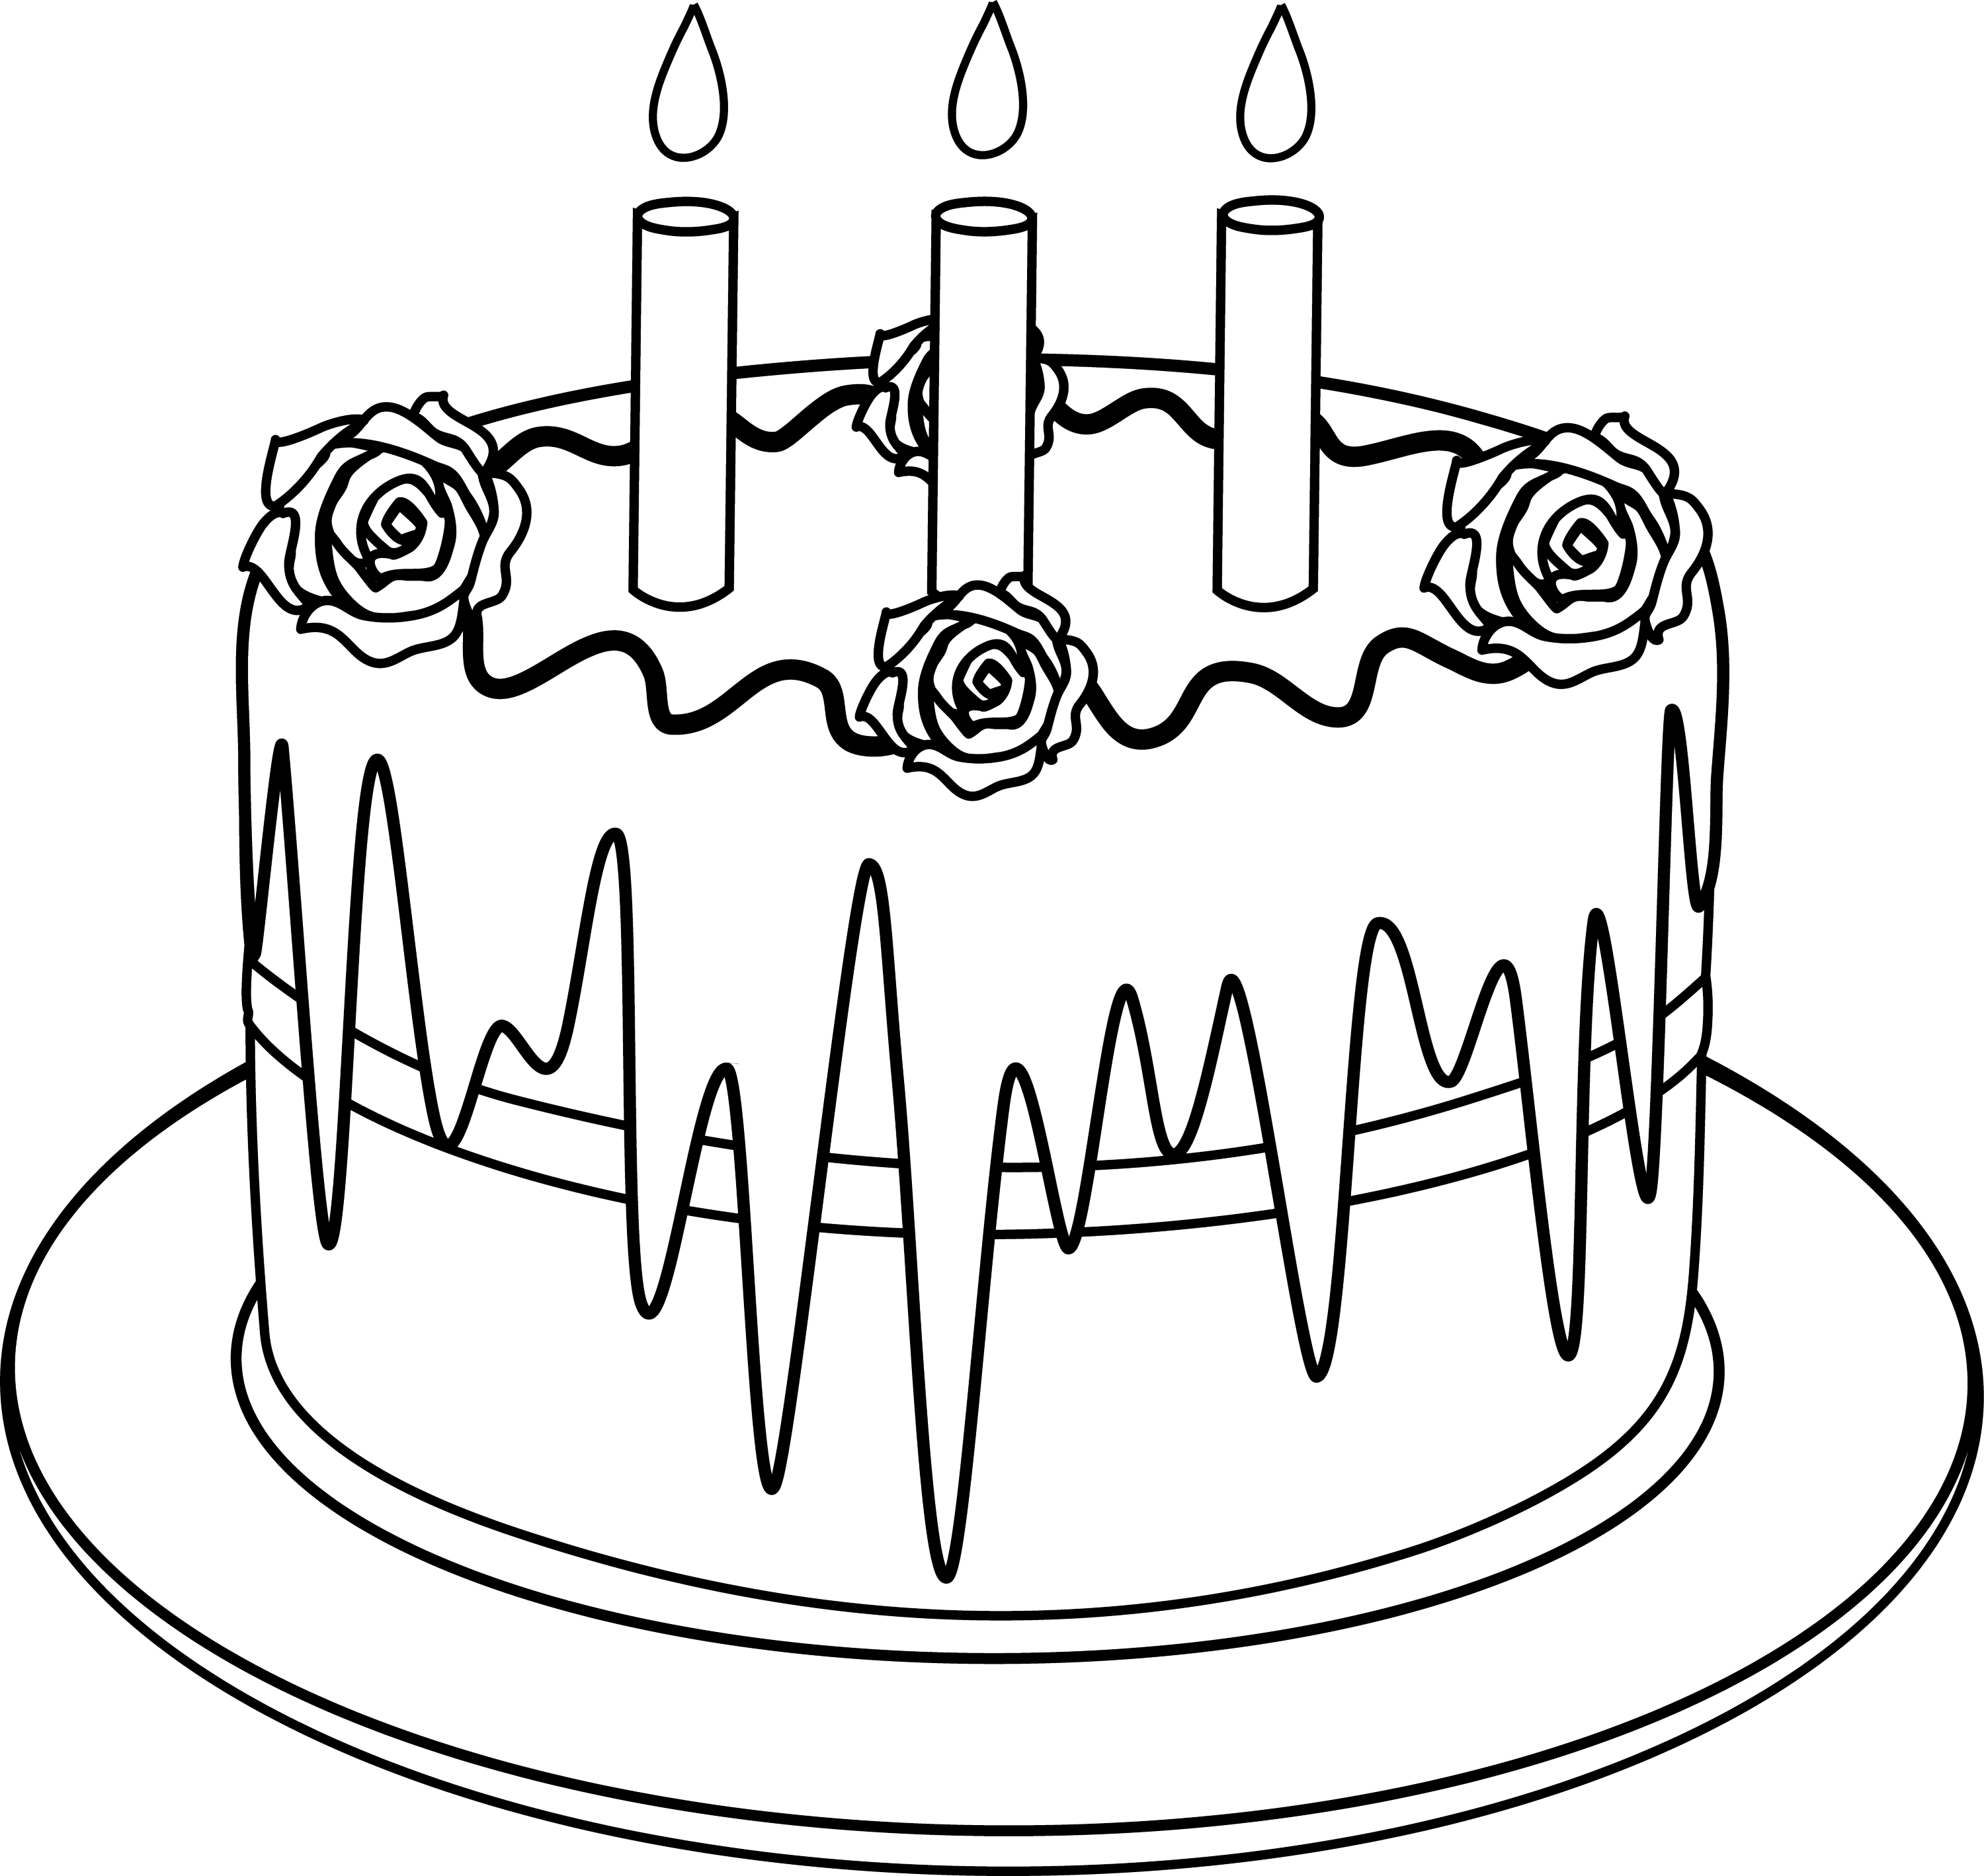 Colorable Line Art Of Birthday Cake Free Clip Art